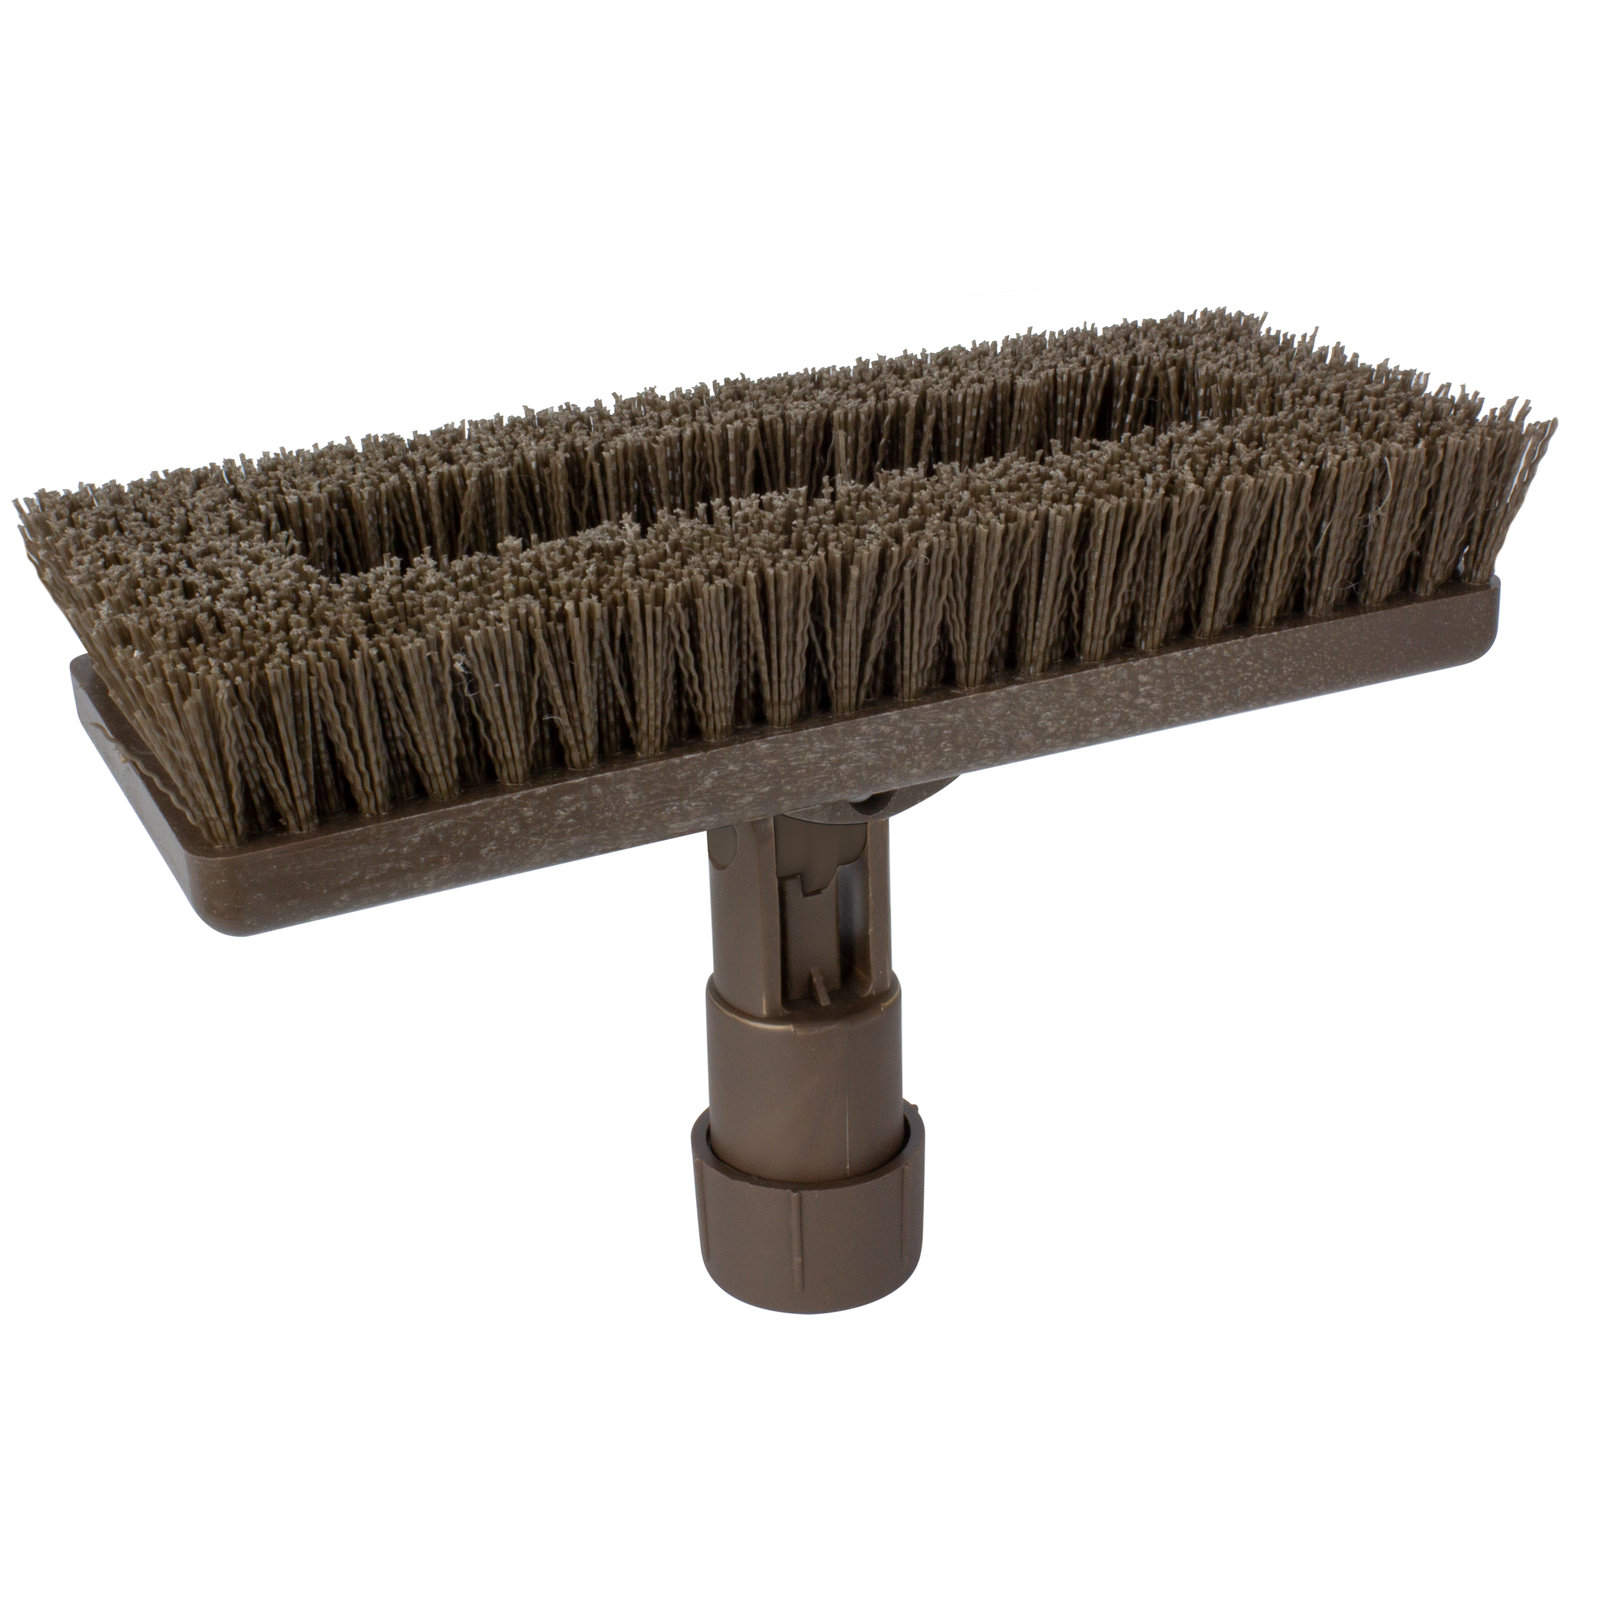 Lodge cleaning brush SCRBRSH  Advantageously shopping at